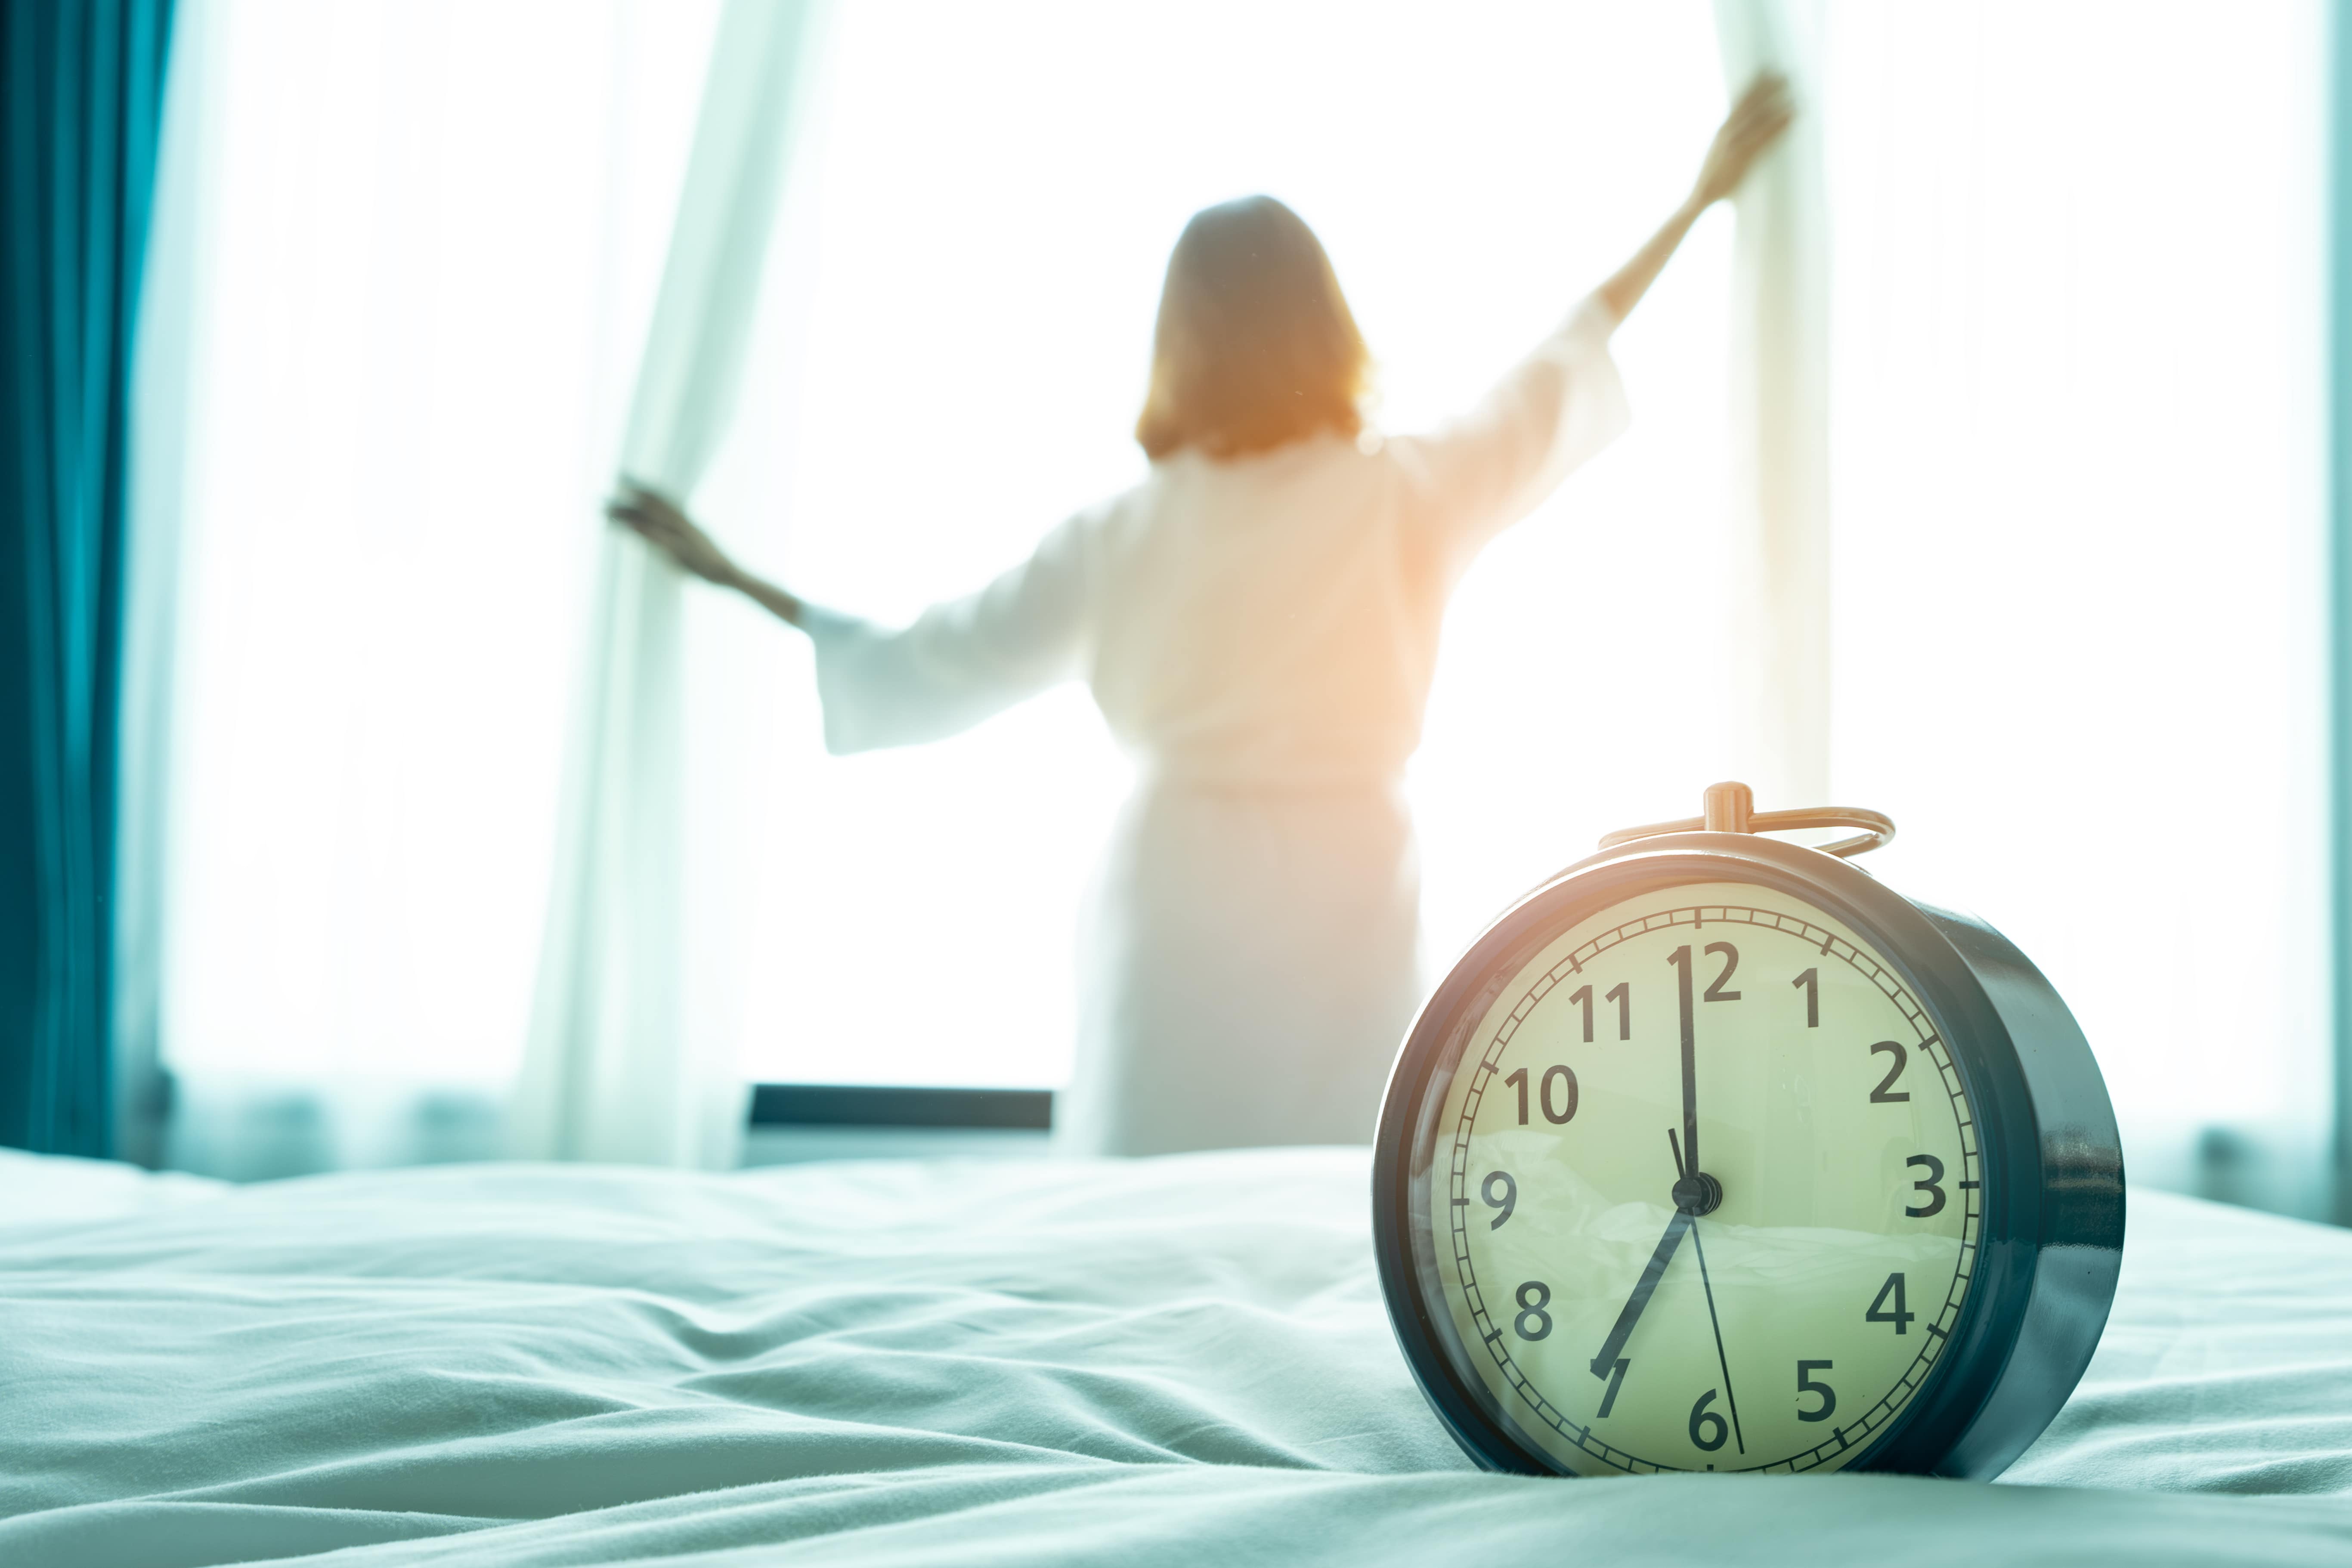 A woman opening the curtains at sun rise with a vintage clock in the foreground that reads 7am